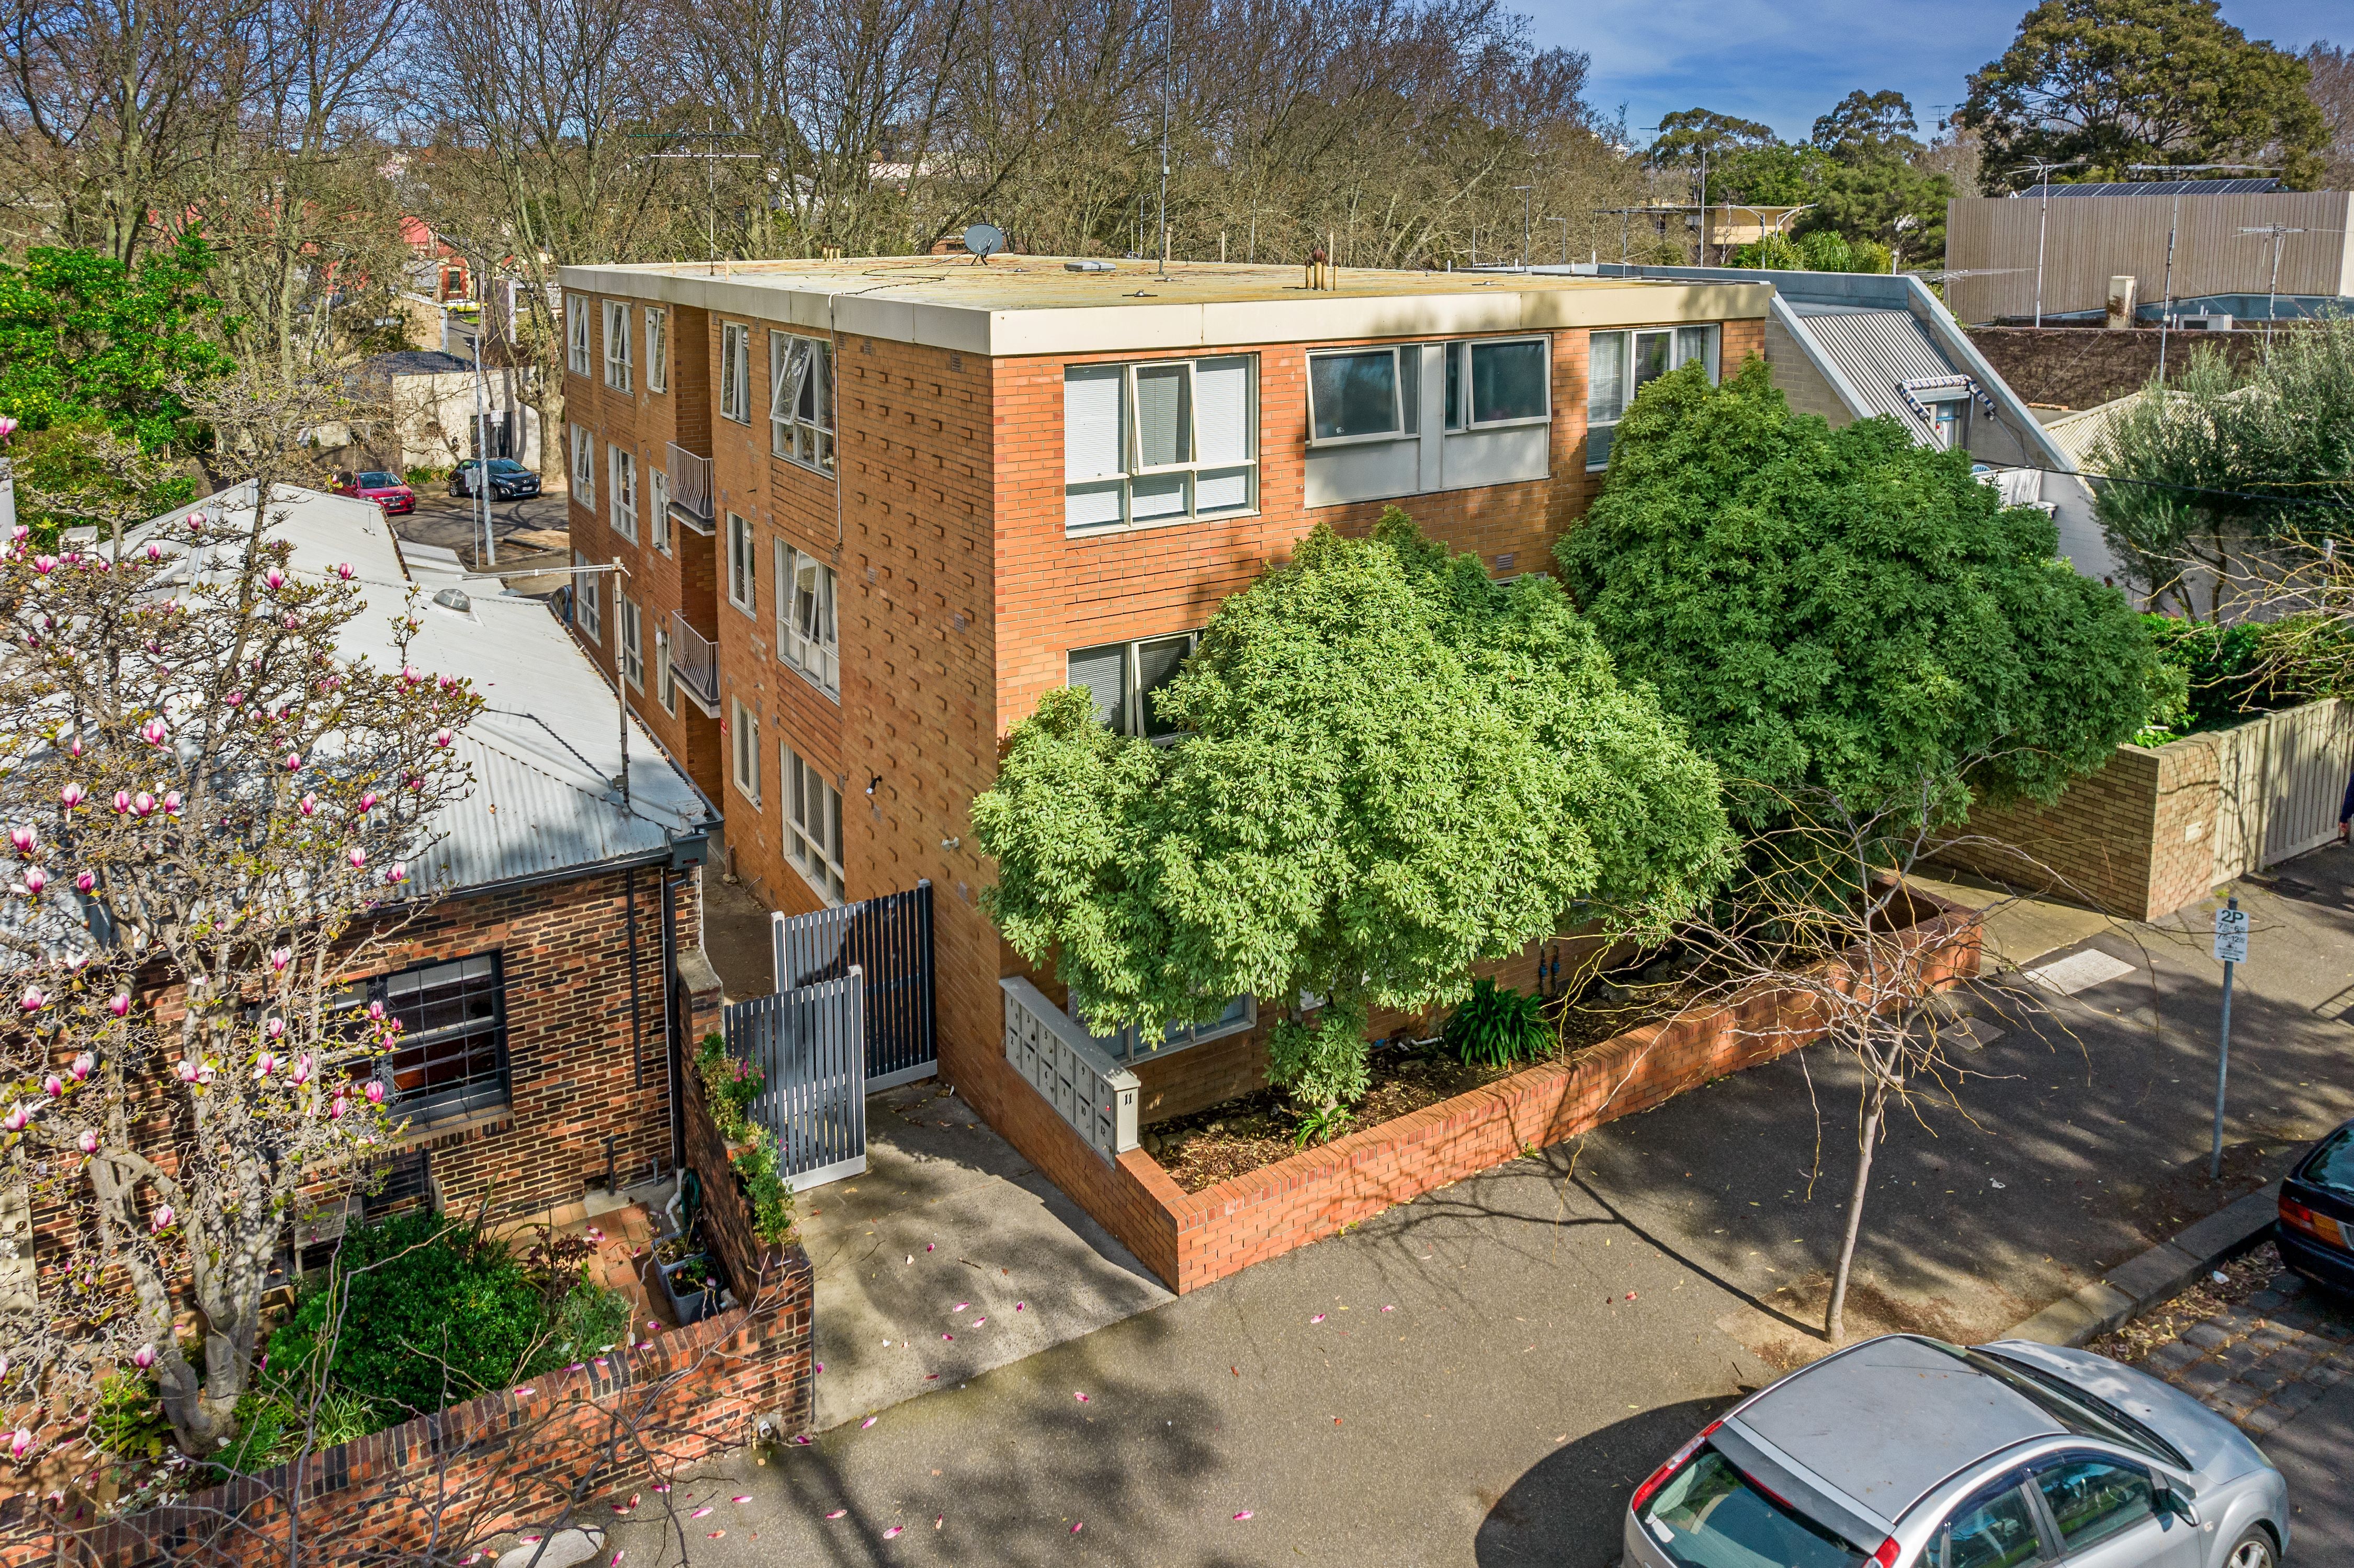 Apartment block in sought after North Melbourne